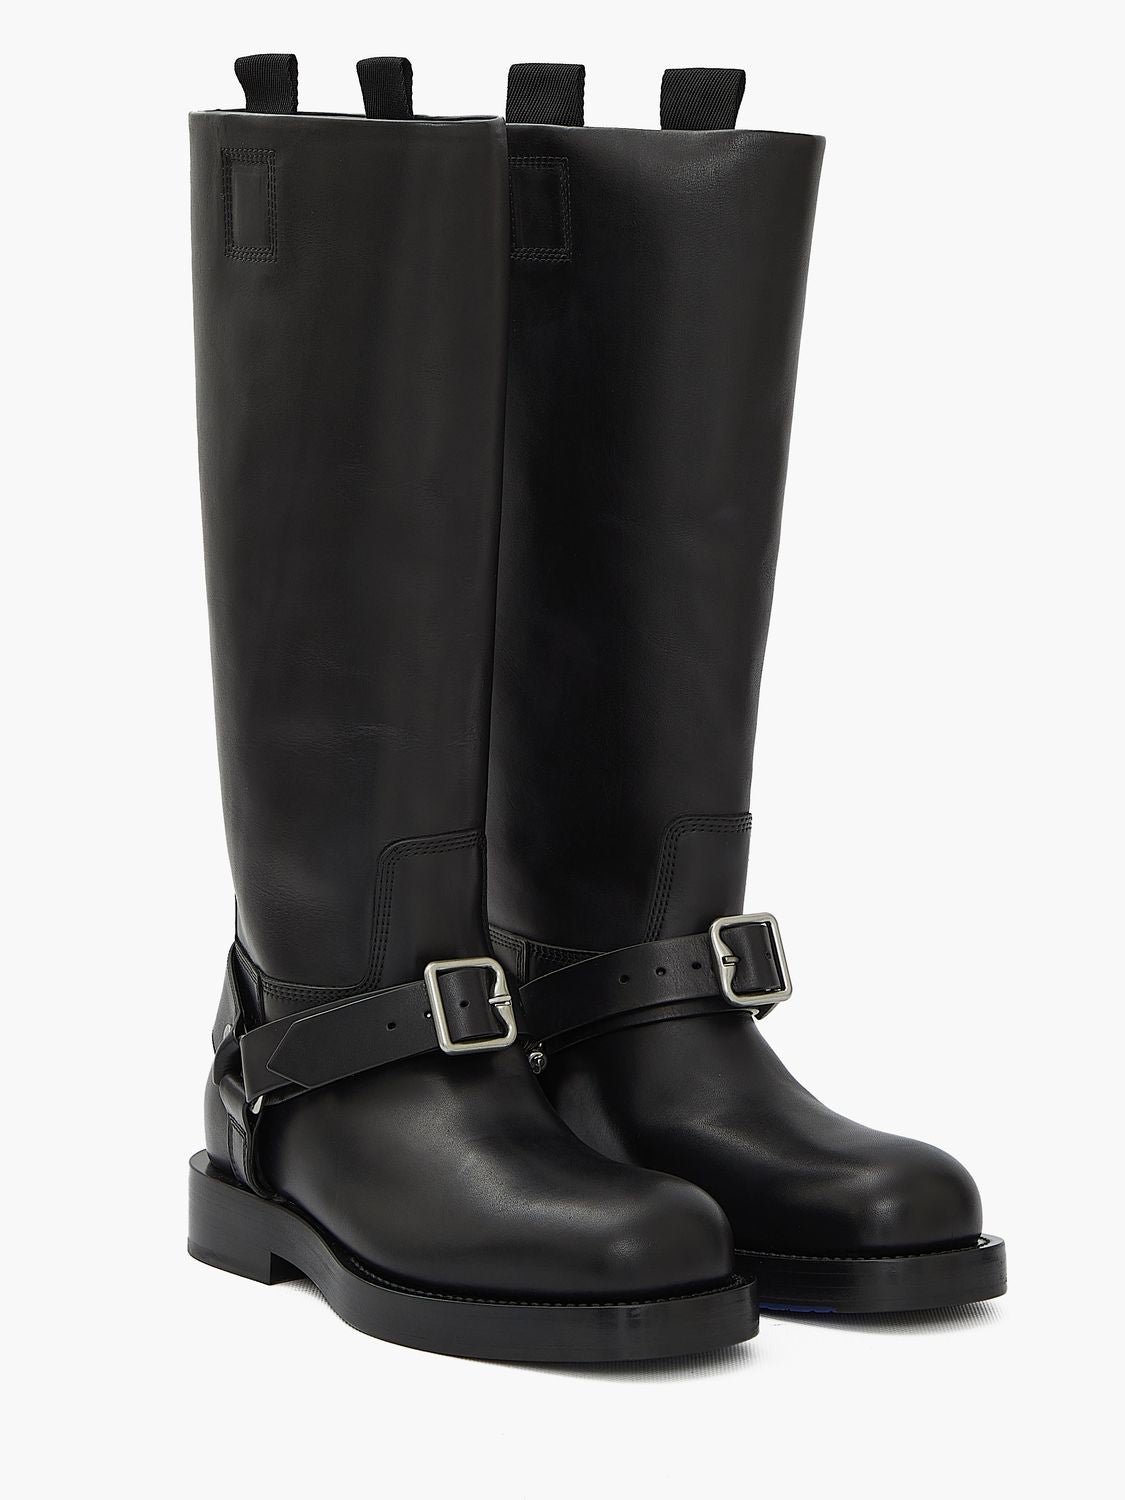 BURBERRY Saddle High Boots in Black Leather with Silver-Tone Buckle Detailing